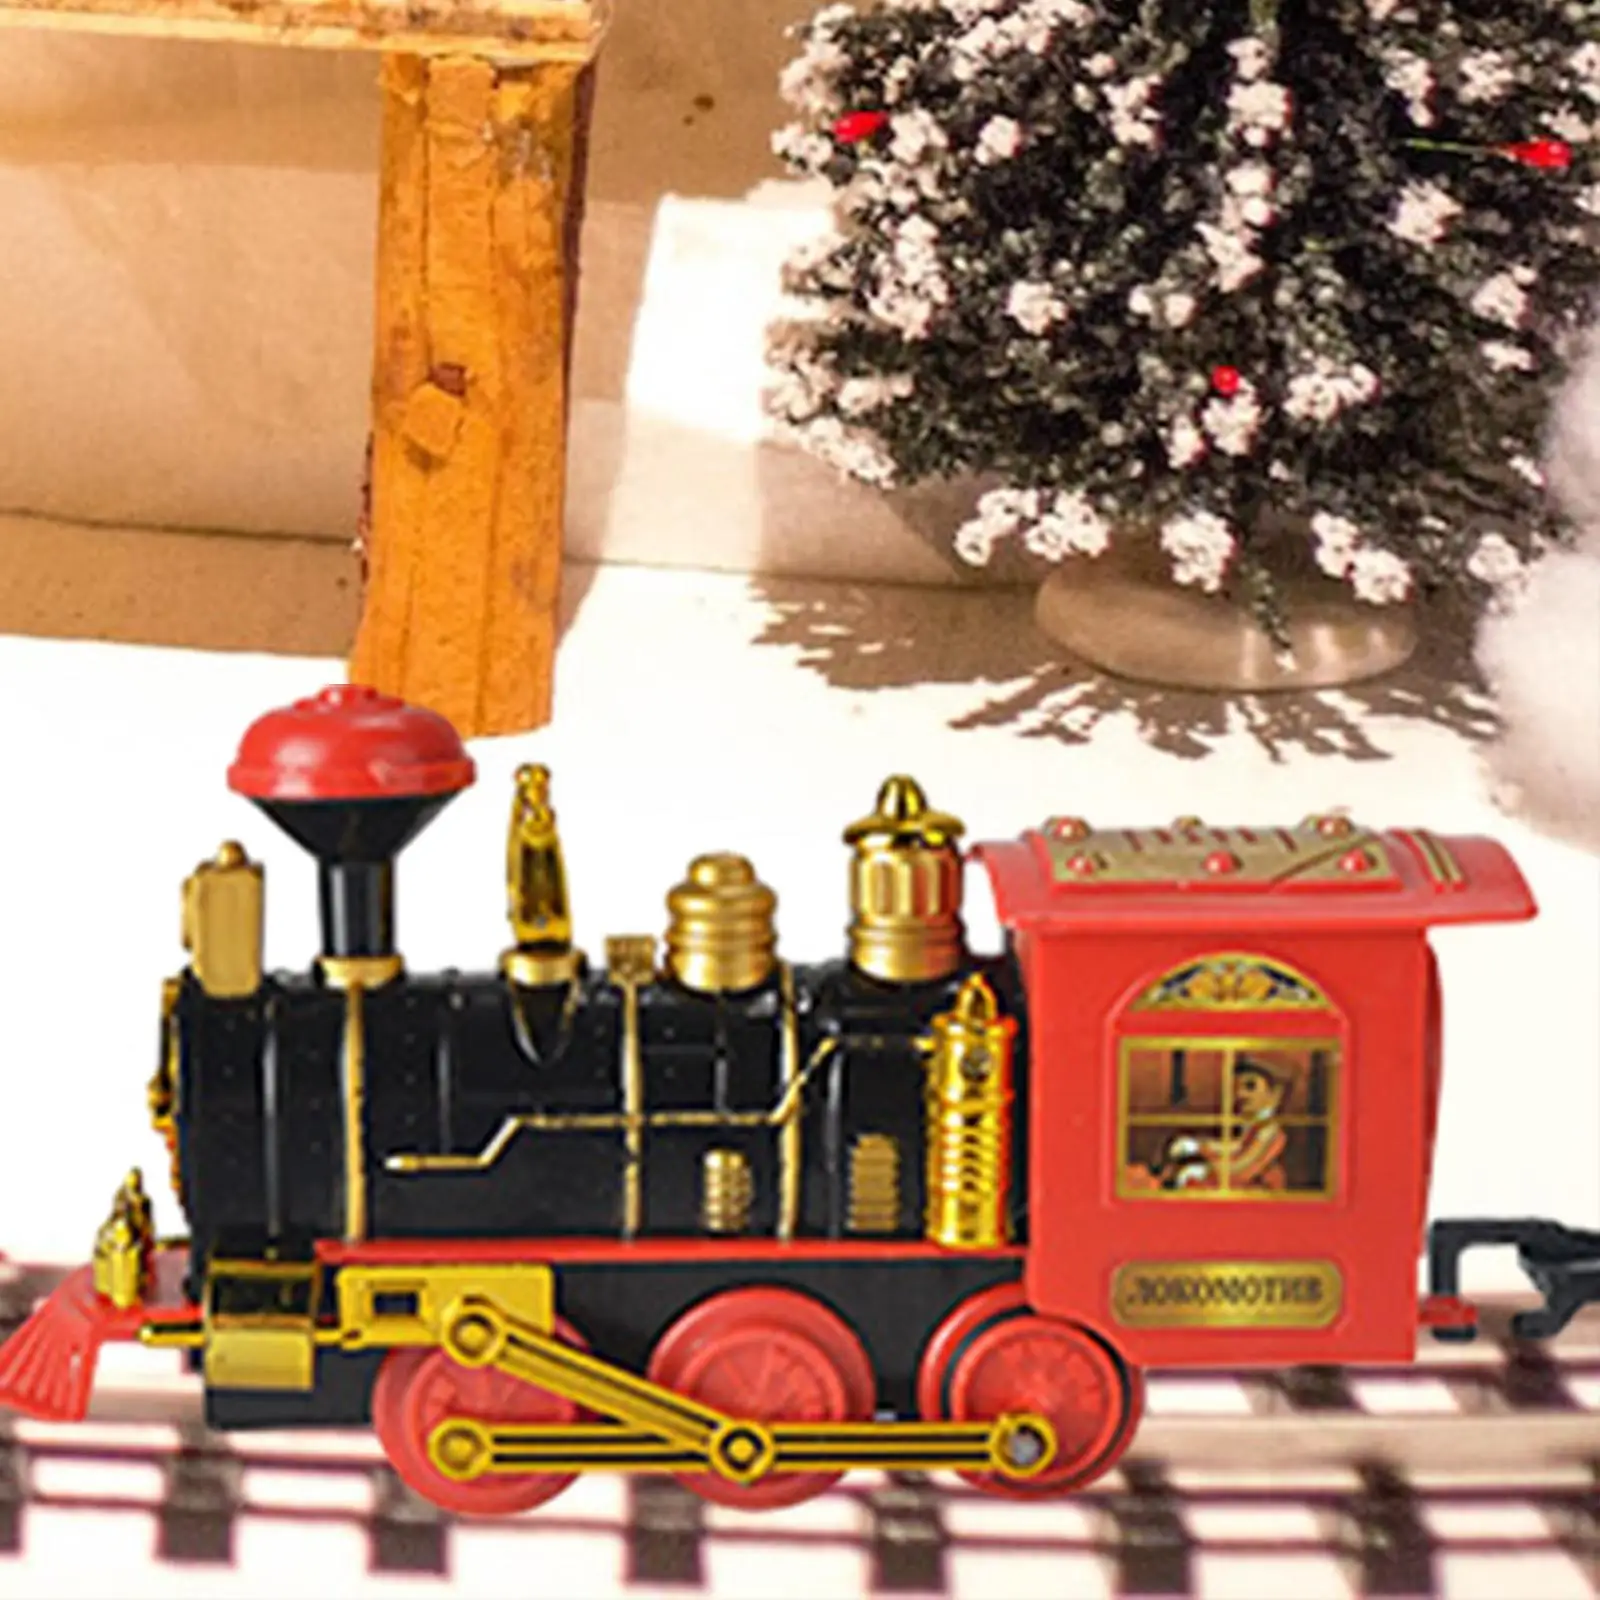 Kids Electric Train Set Christmas Train Christmas Tree with Light & Sound Electric Train Tracks for Boys Children Birthday Gifts